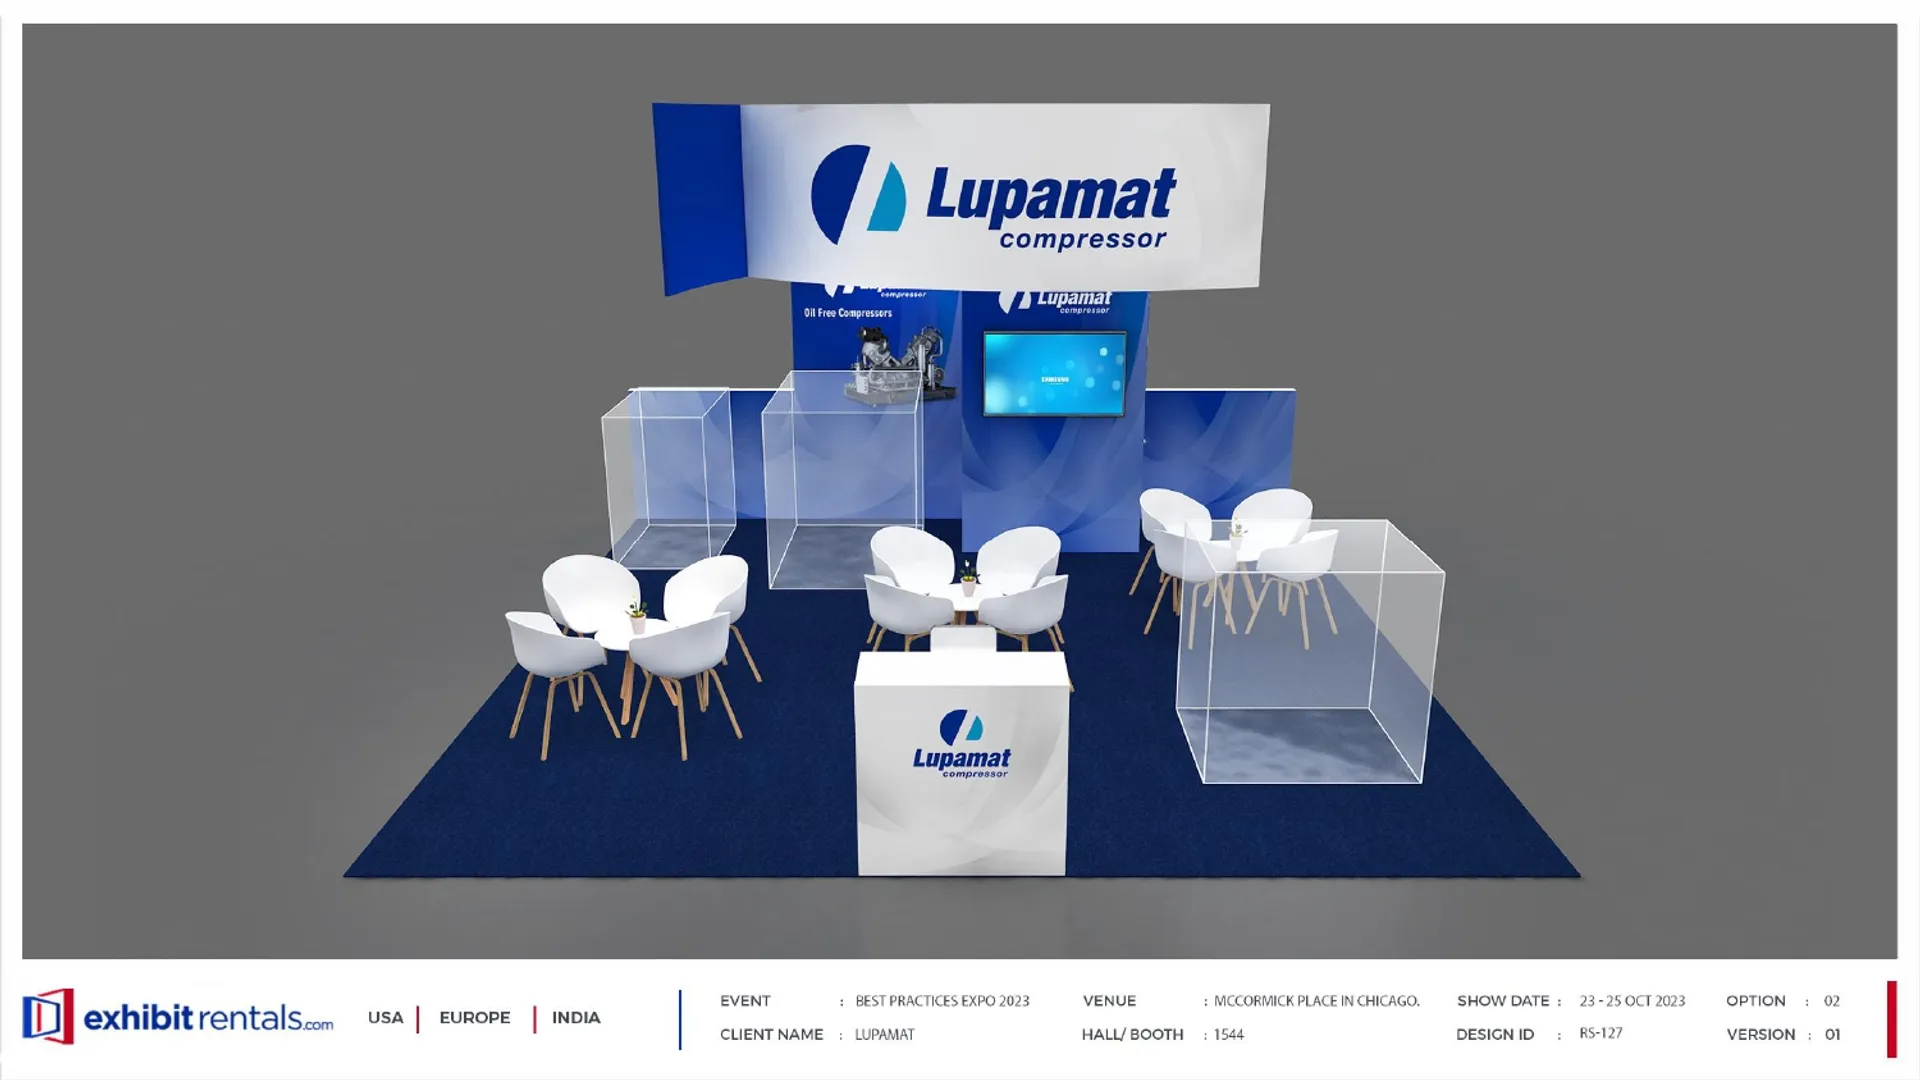 booth-design-projects/Exhibit-Rentals/2024-04-18-40x40-PENINSULA-Project-99/2.1_Lupamat_Best practices expo_ER design proposal-20_page-0001-ze1xcy.jpg